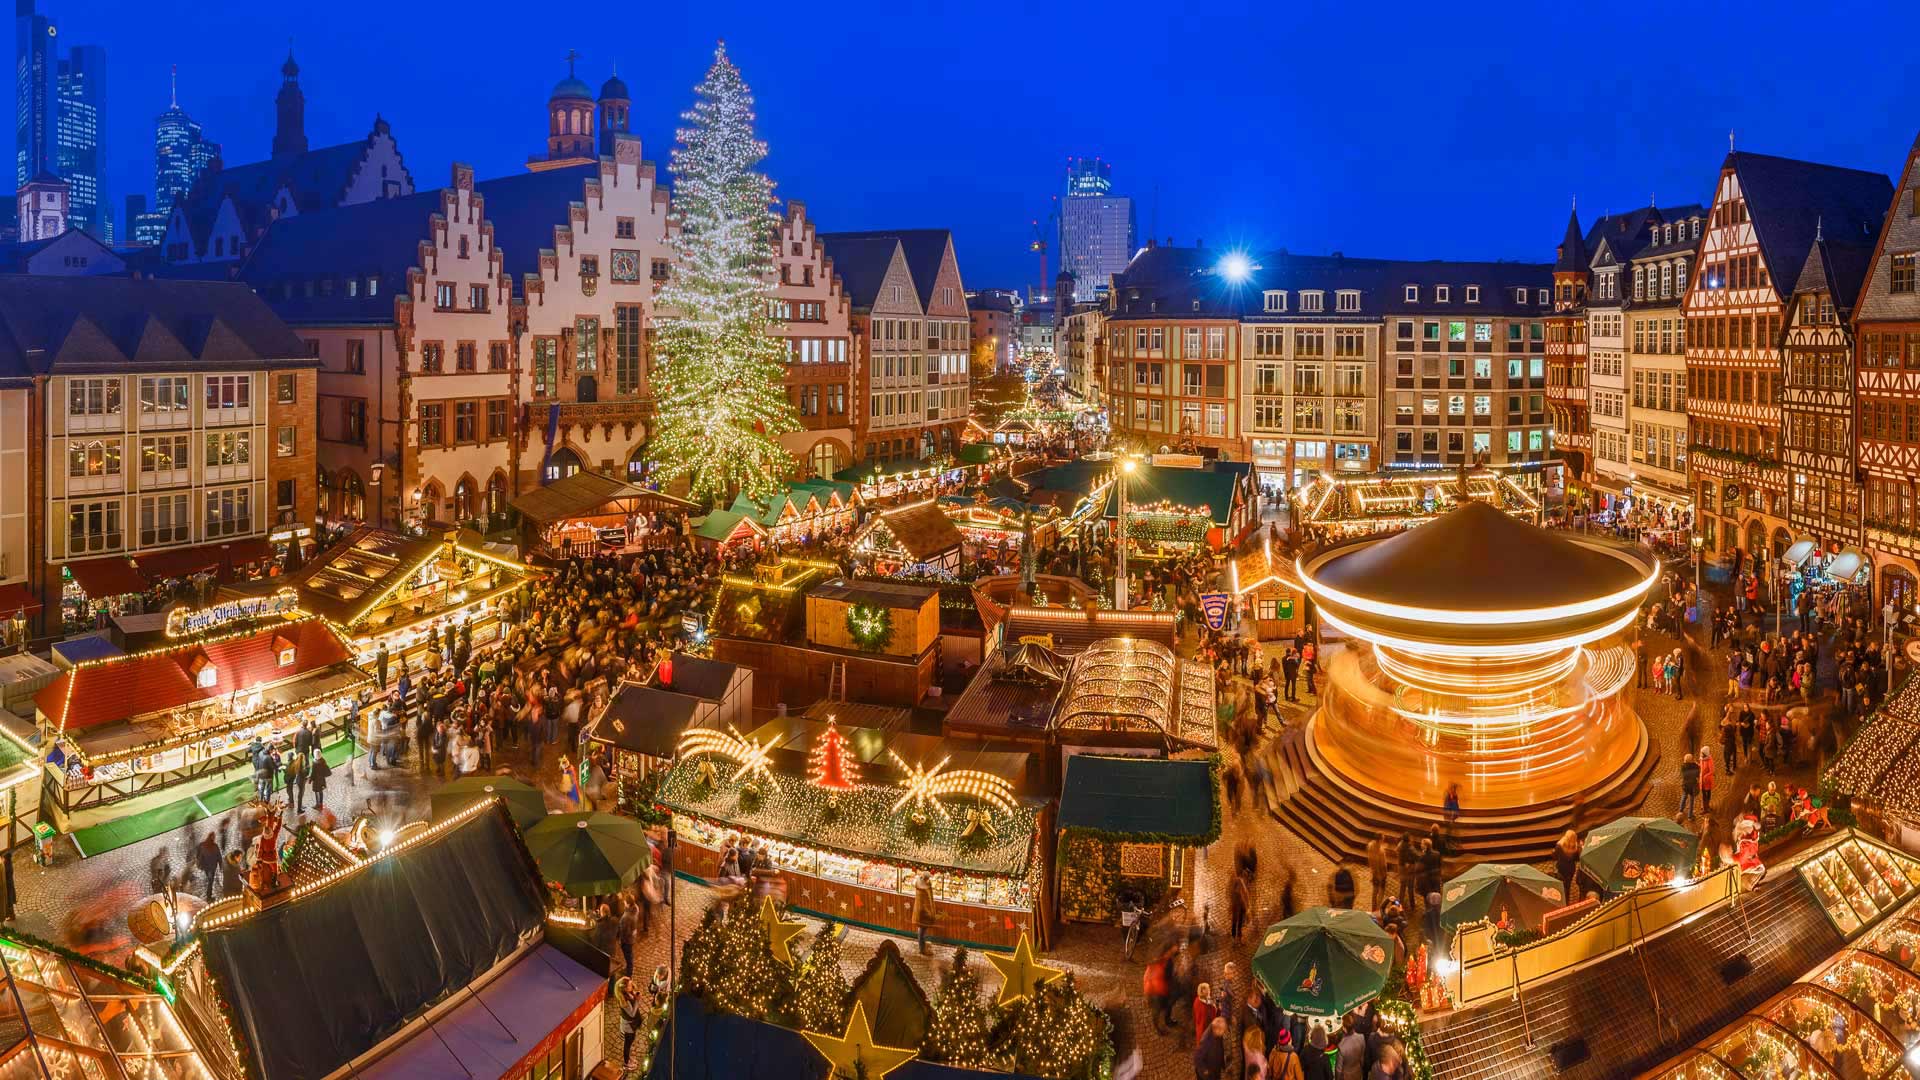 A Christmas market with a long history